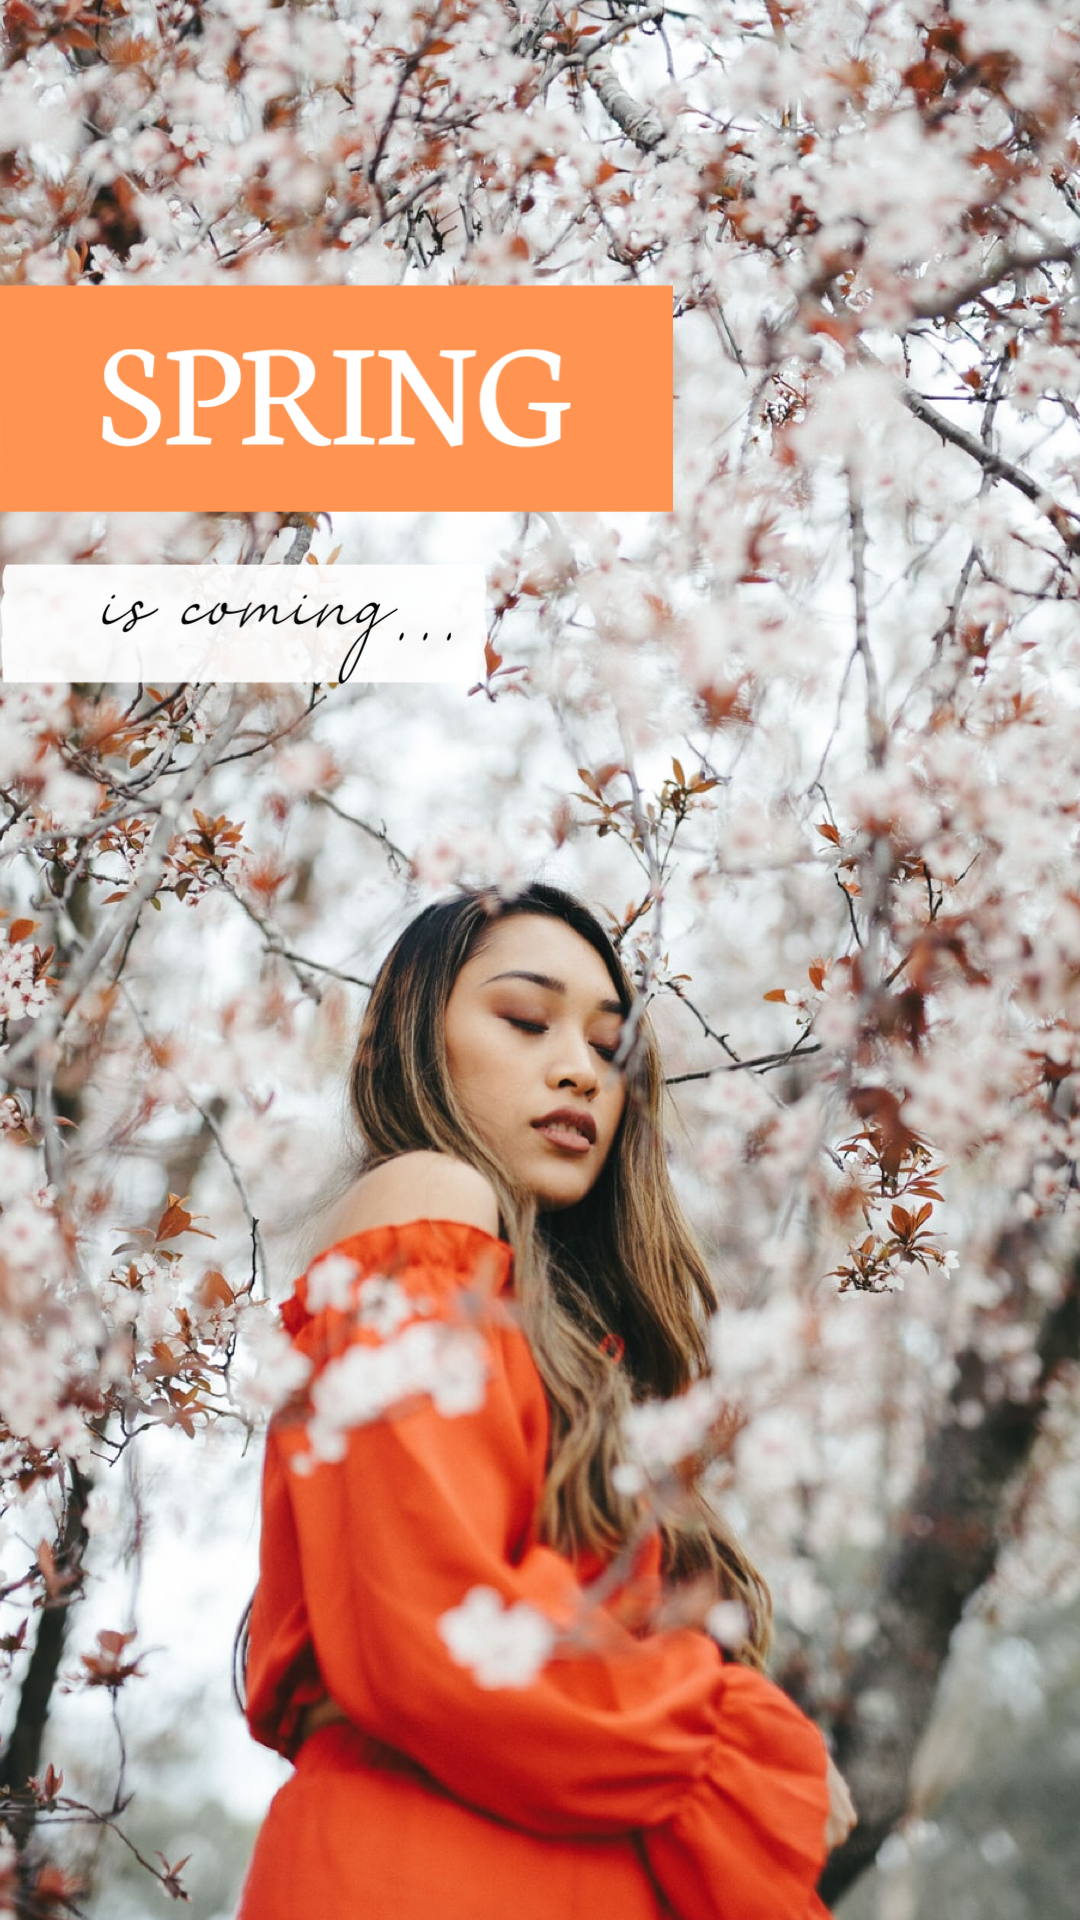 A Woman In An Orange Dress Standing Under A Tree Spring Story Template